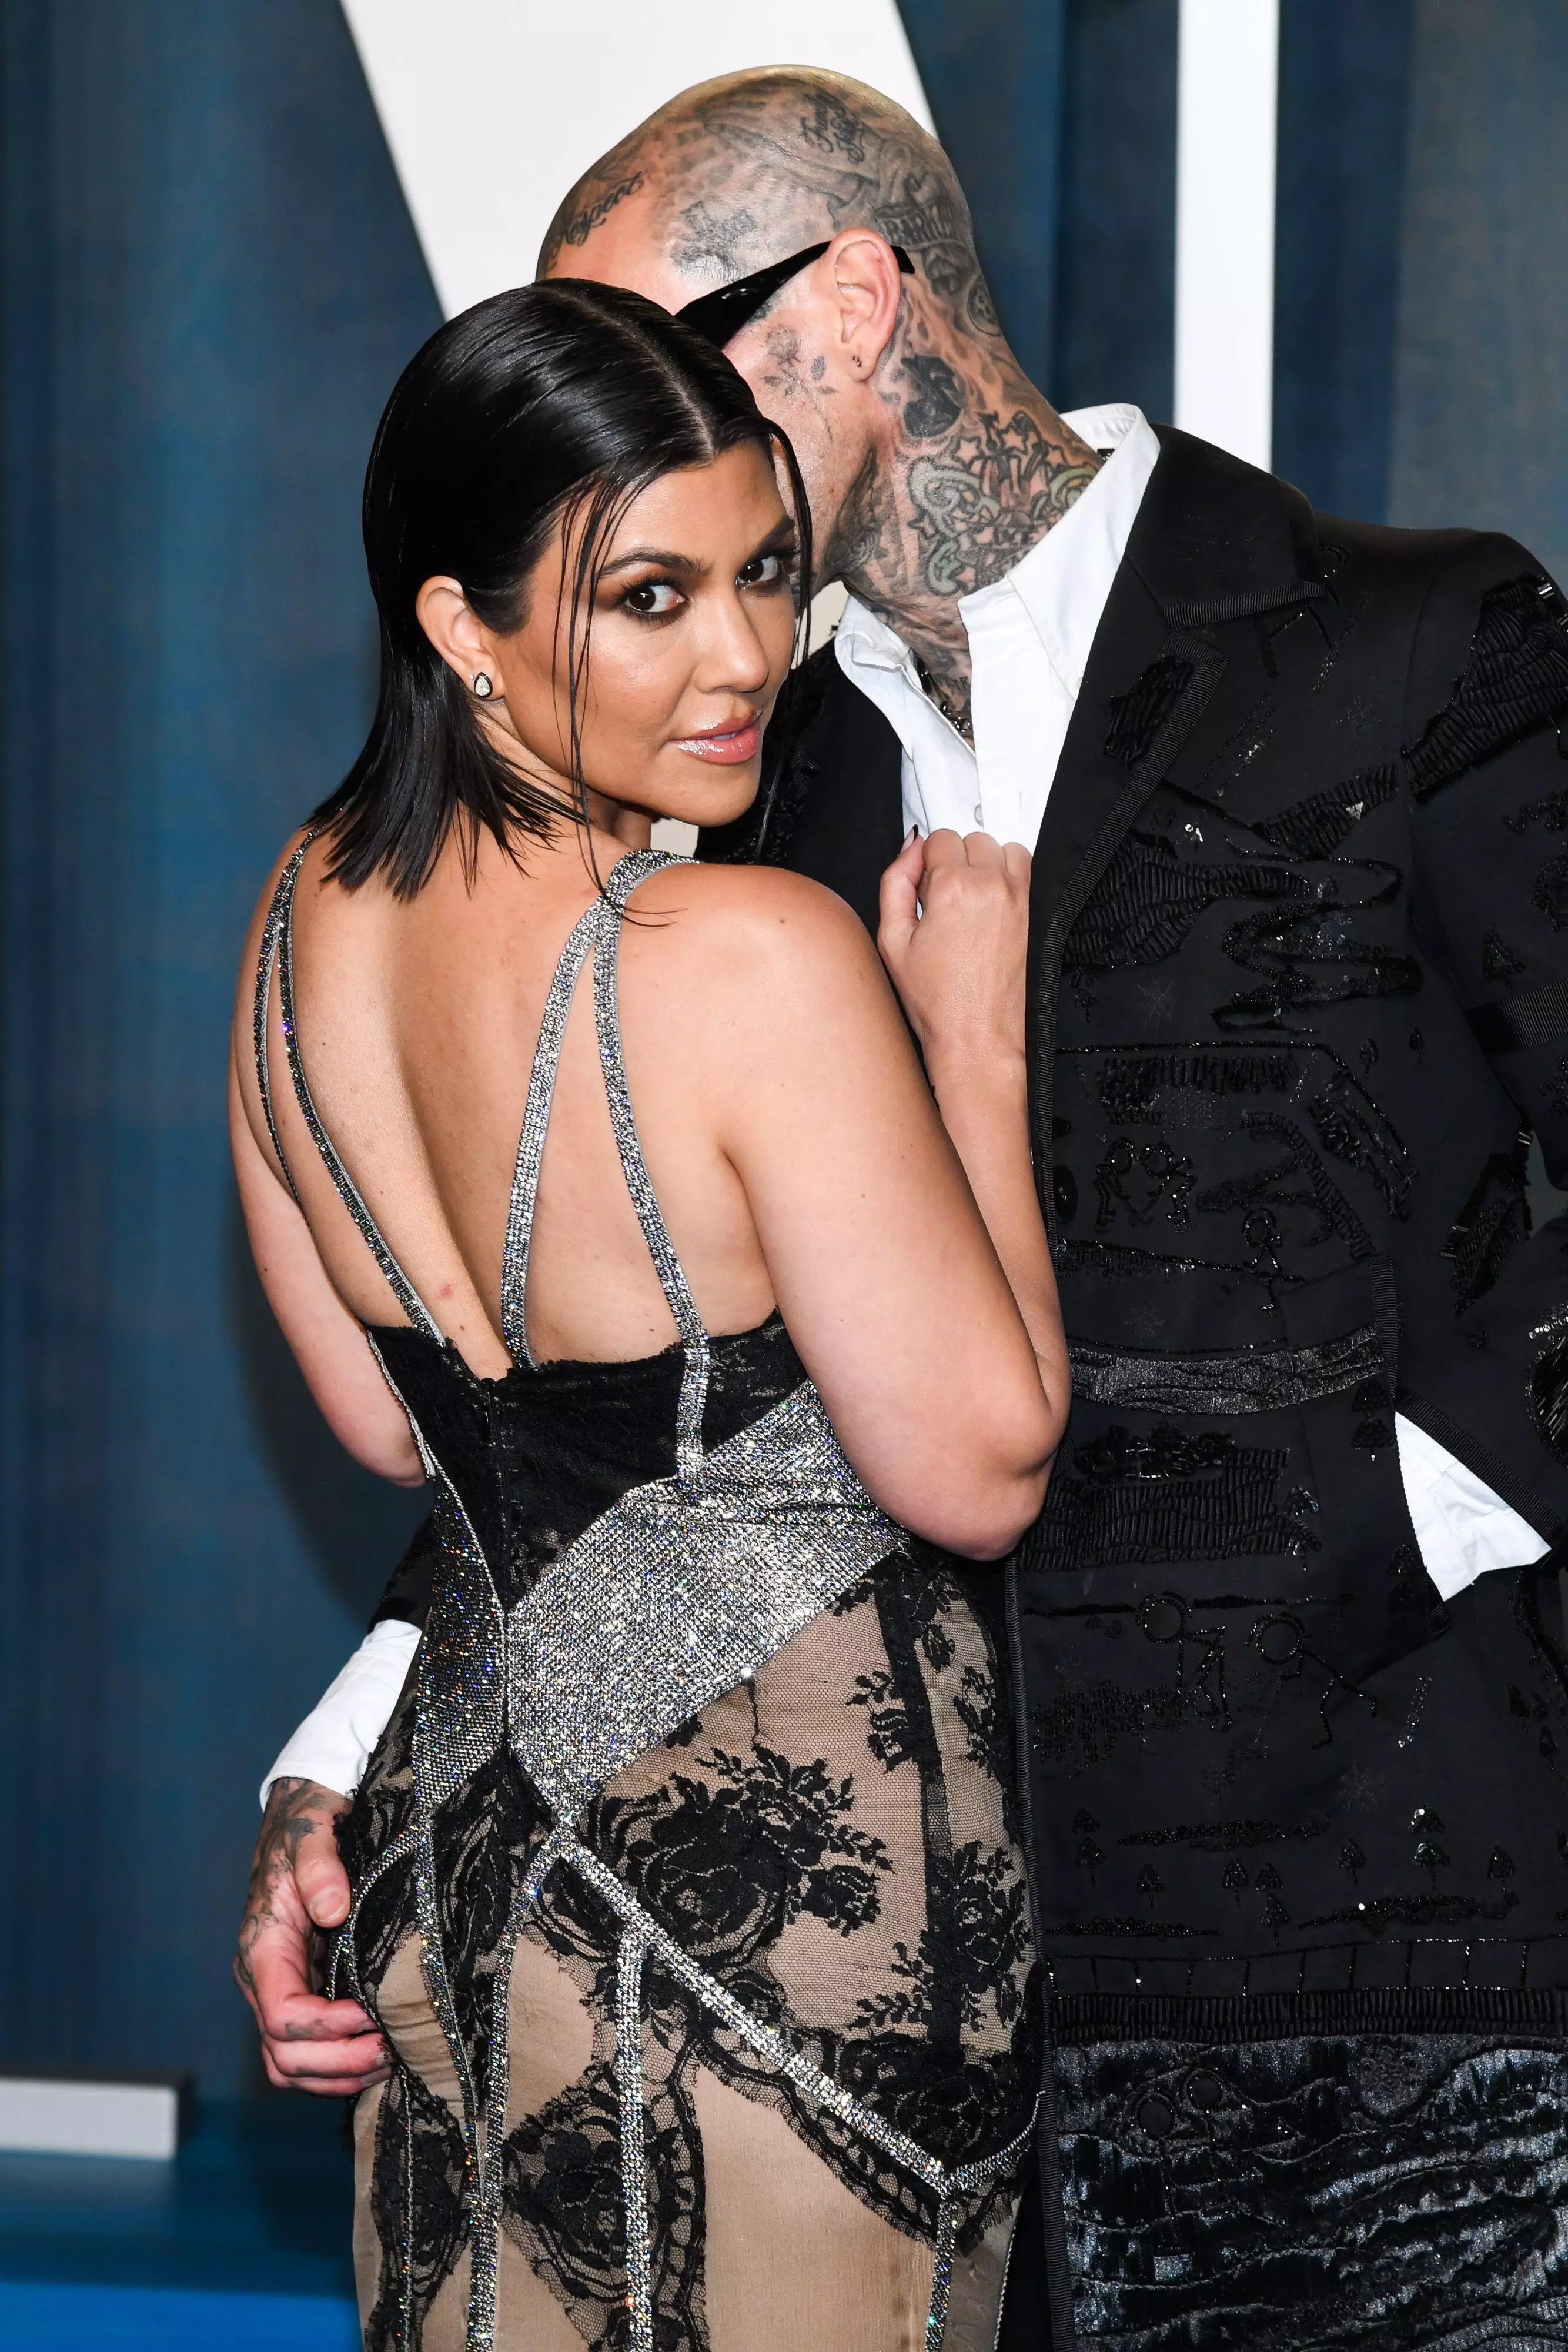 The pair continued their red carpet PDA later that night at the Vanity Fair Oscar Party (